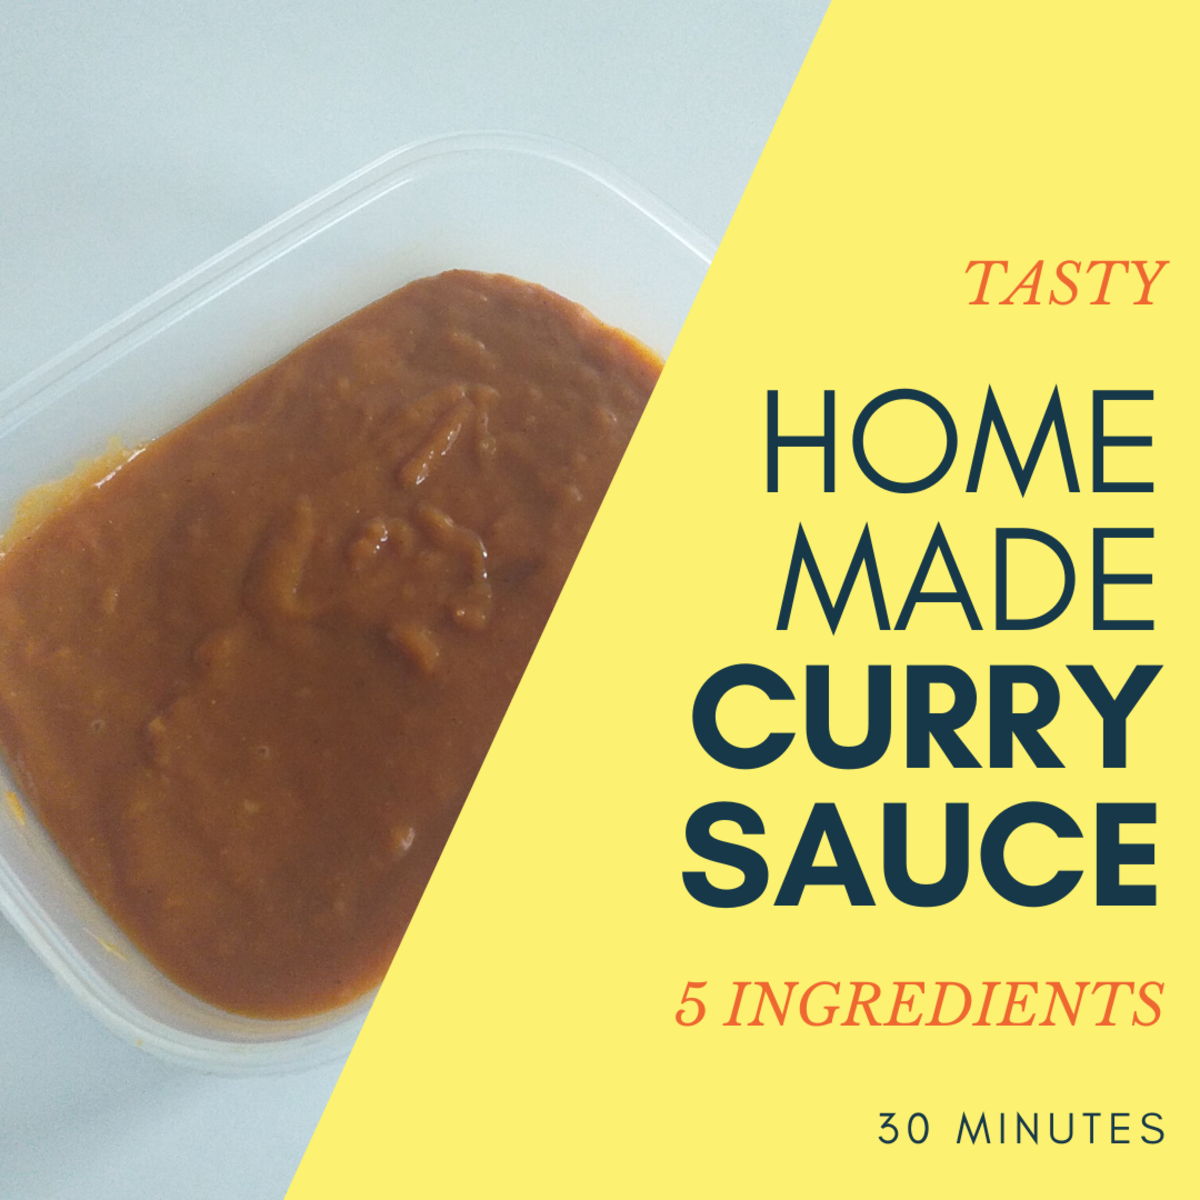 Quick homemade curry sauce